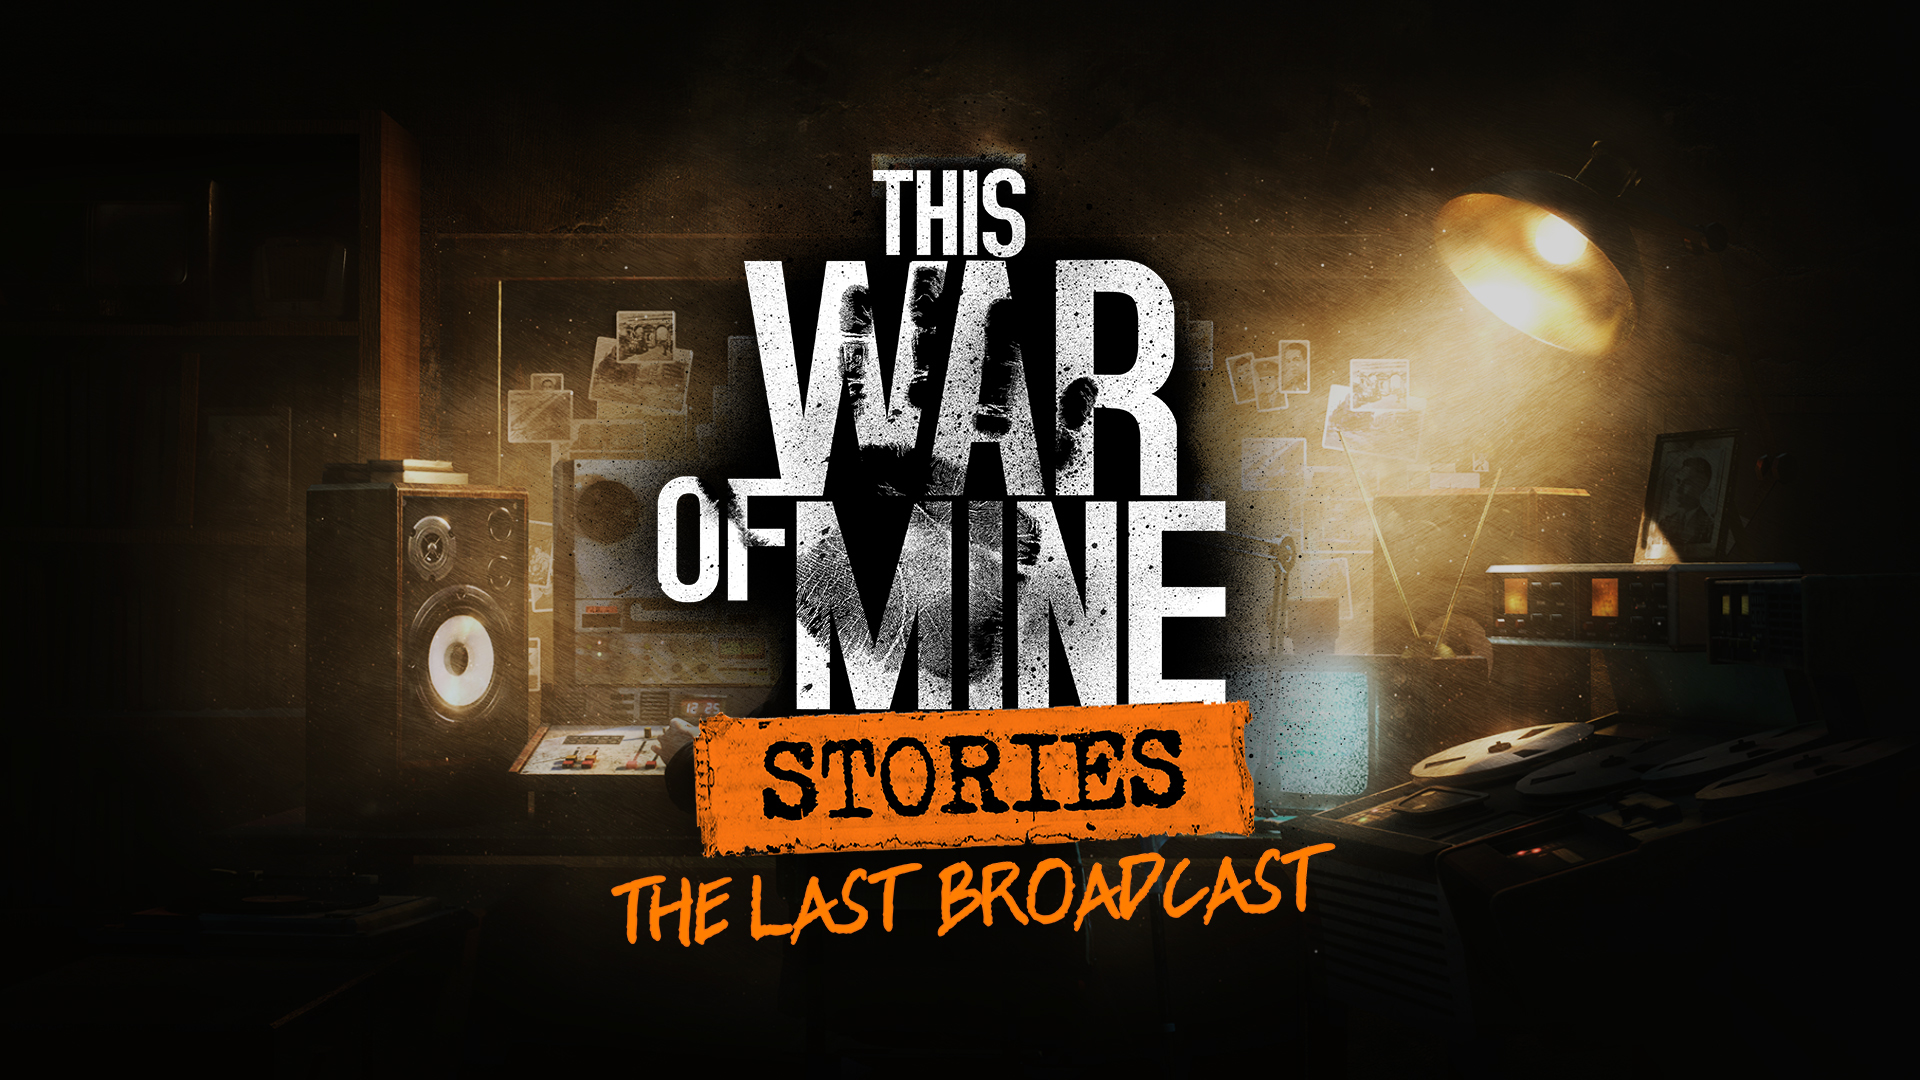 “The Last Broadcast” DLC for This War of Mine: Stories Launches November 14